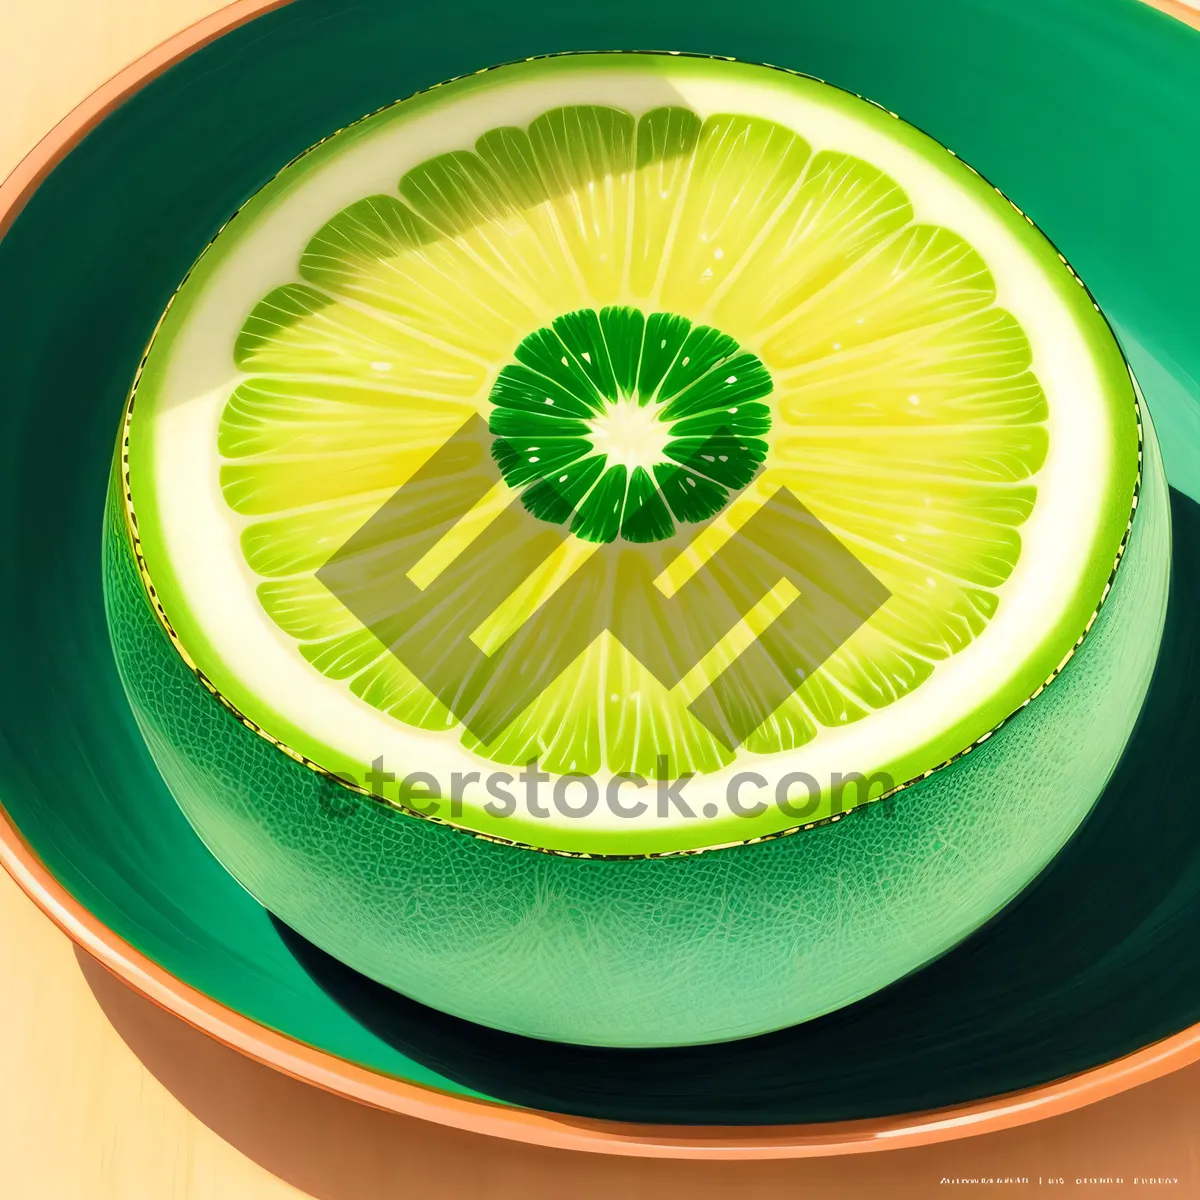 Picture of Fresh Citrus Bowl with Juicy Slices